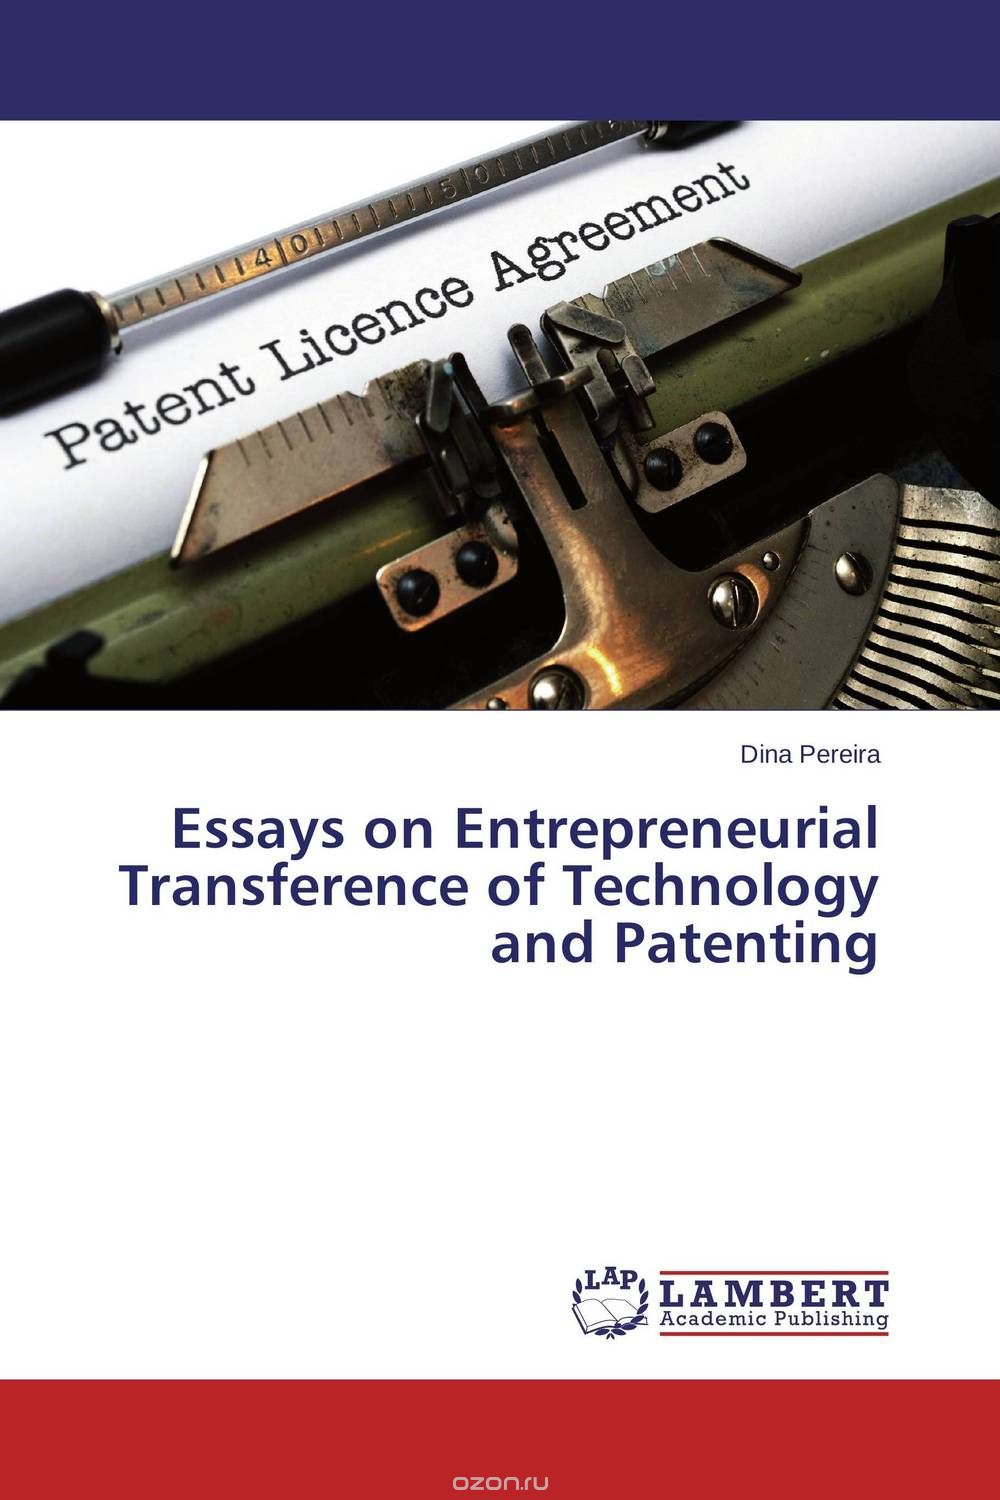 Essays on Entrepreneurial Transference of Technology and Patenting